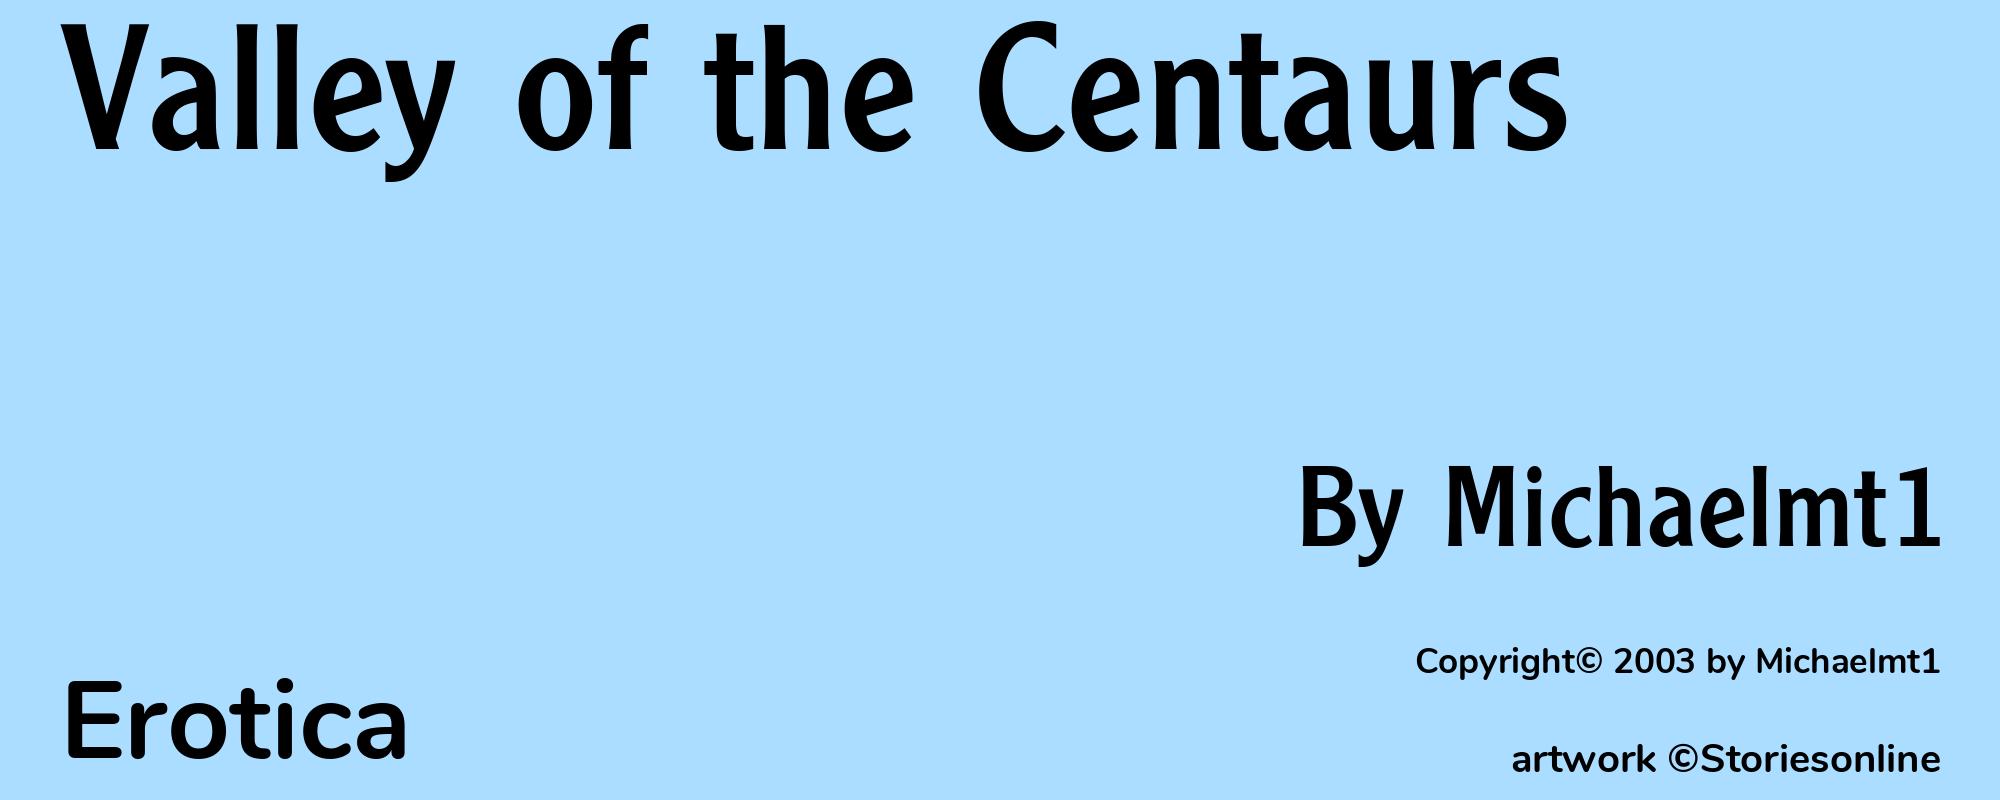 Valley of the Centaurs - Cover